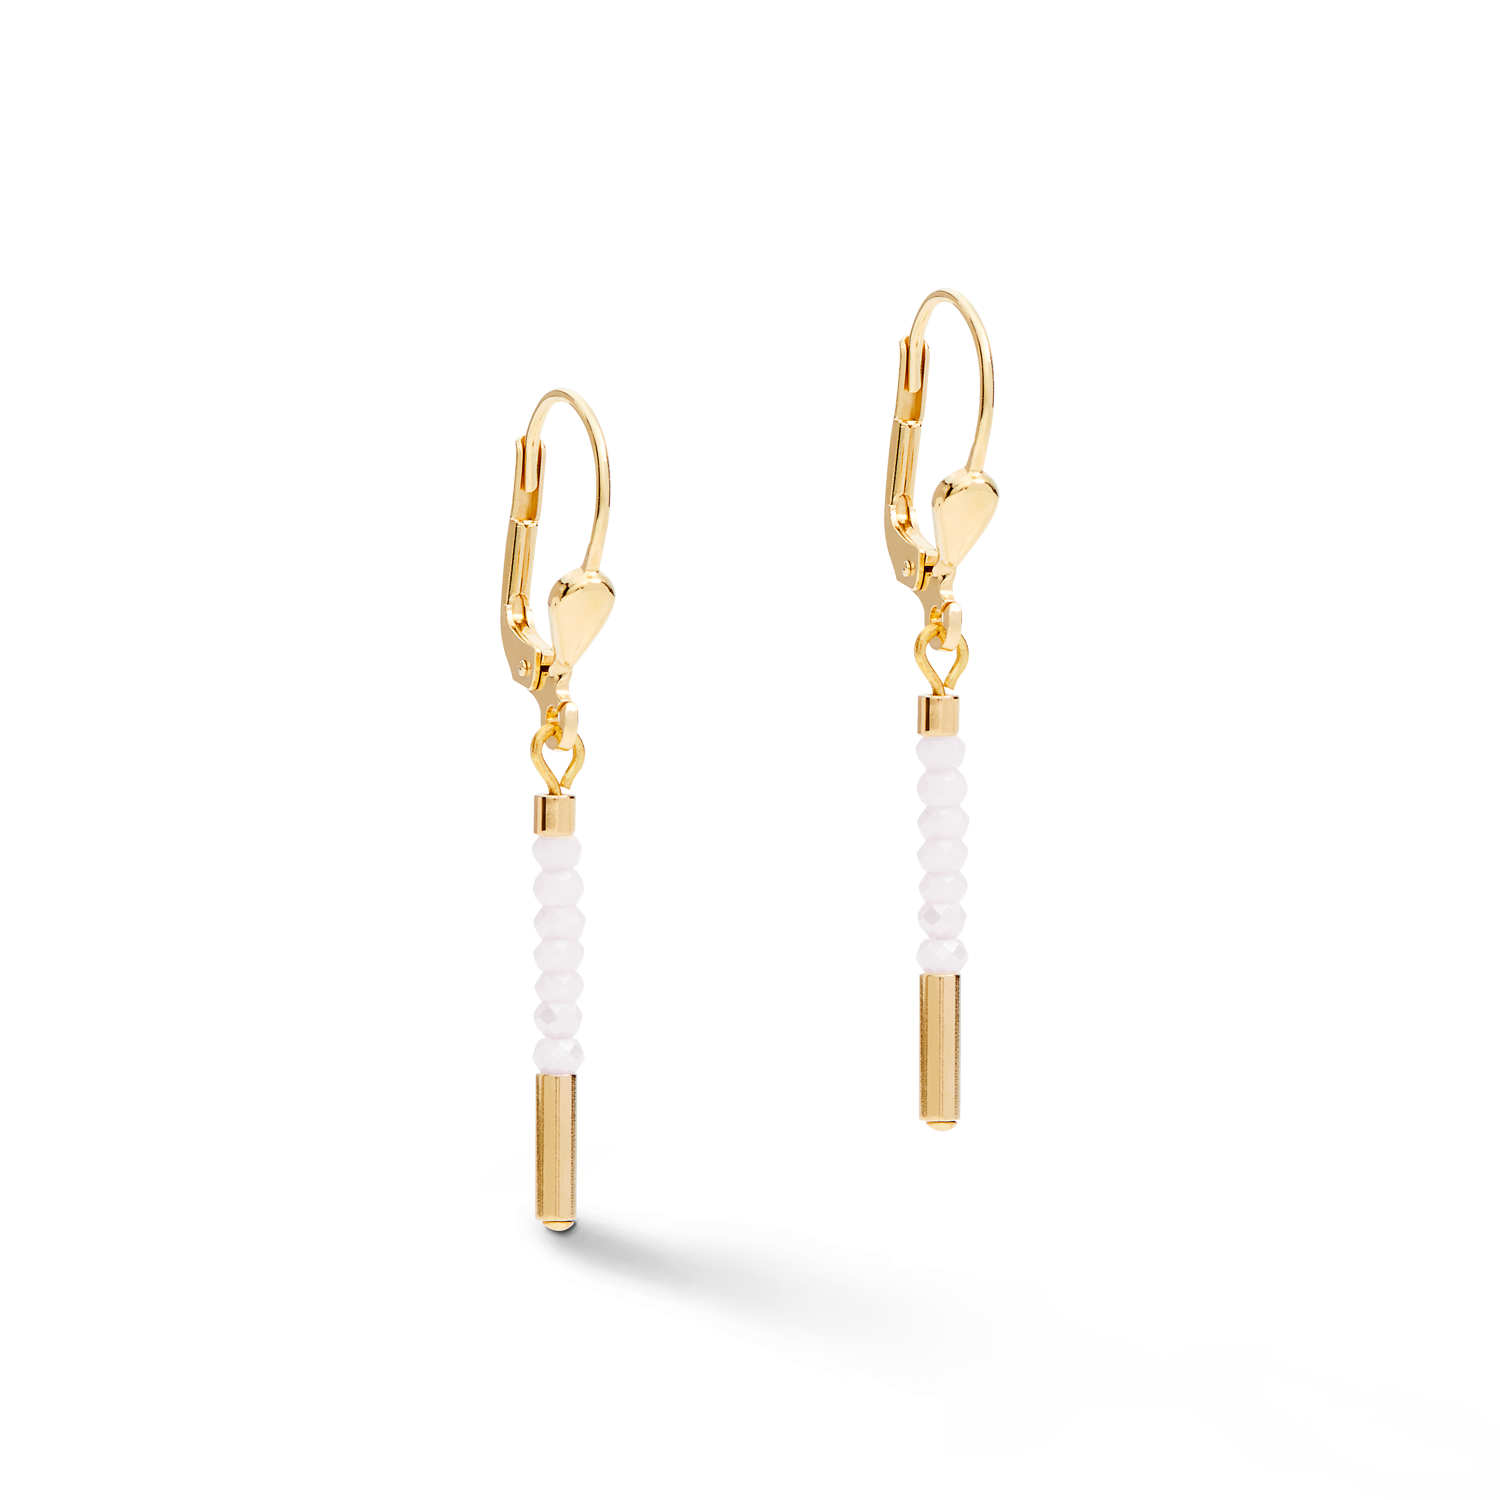 Earrings Waterfall stainless steel gold & glass white